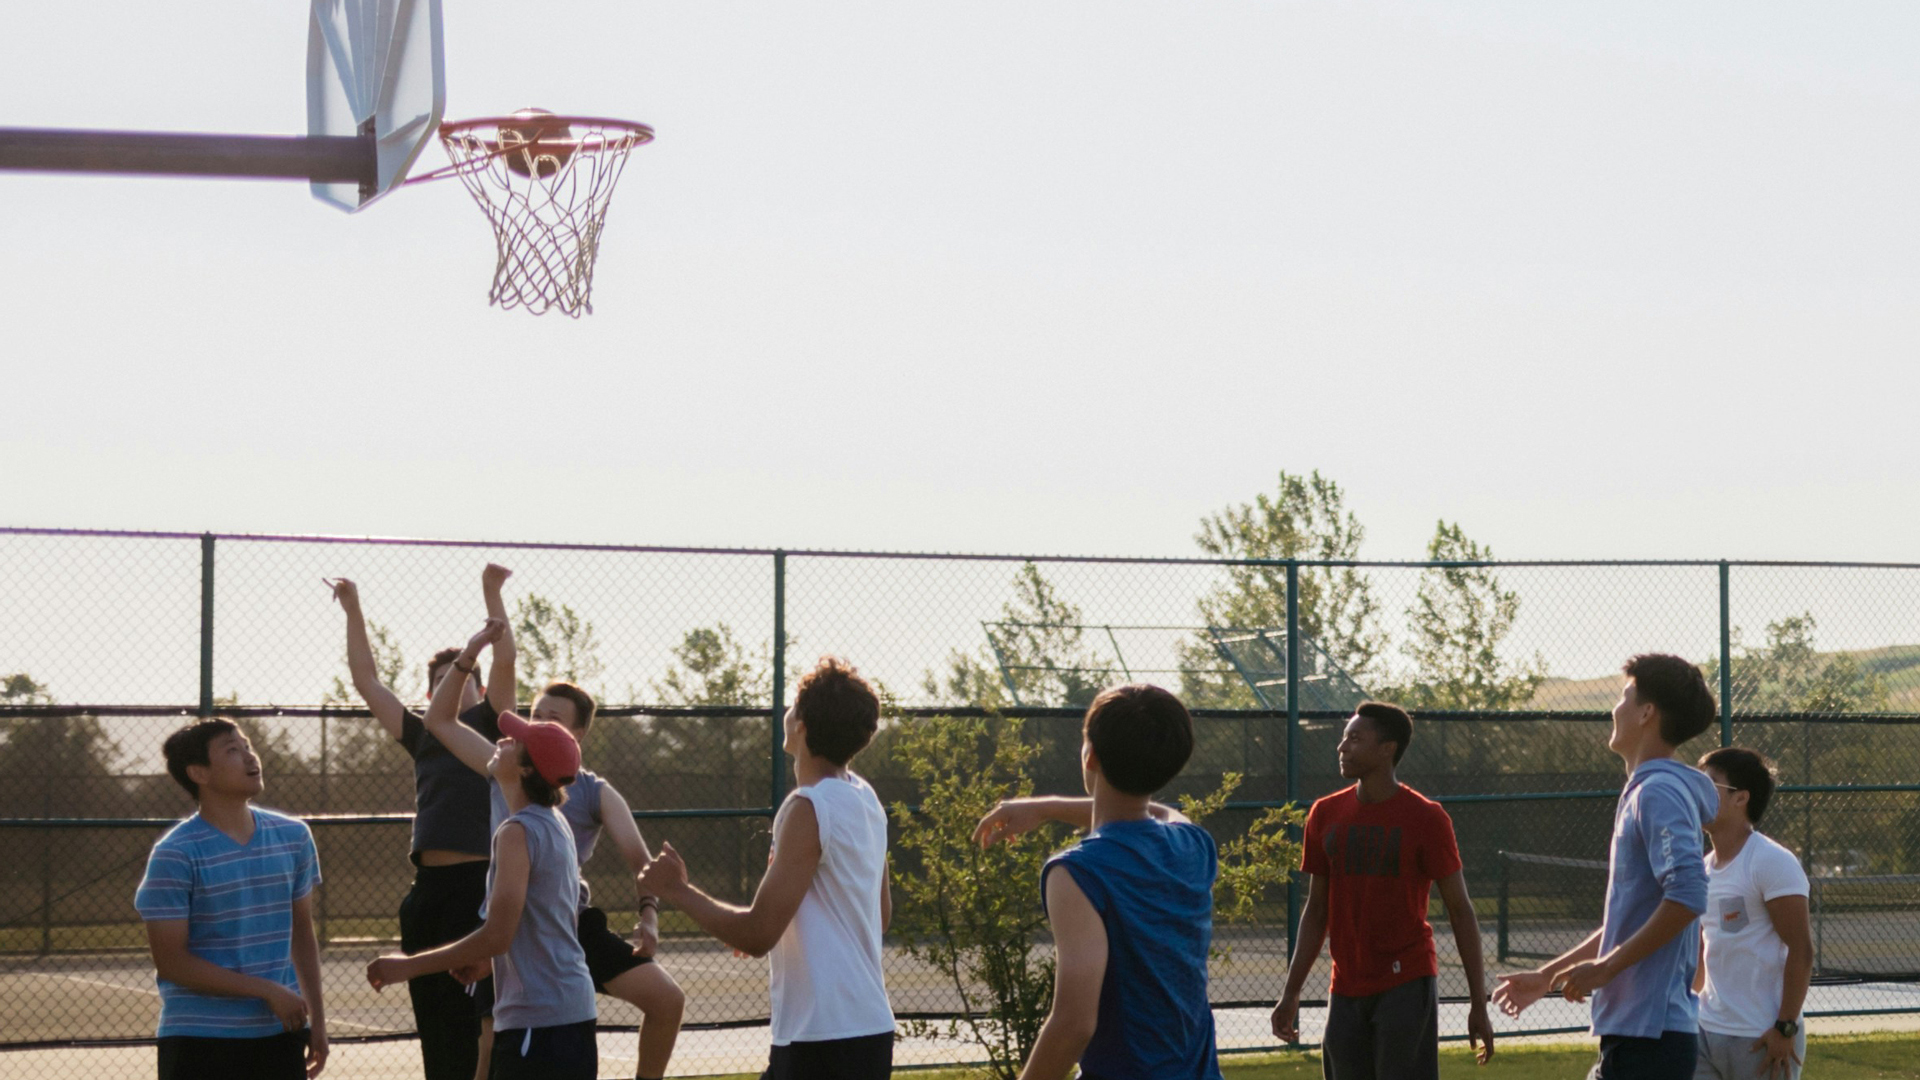 Grace students playing basketball on the outdoor court.